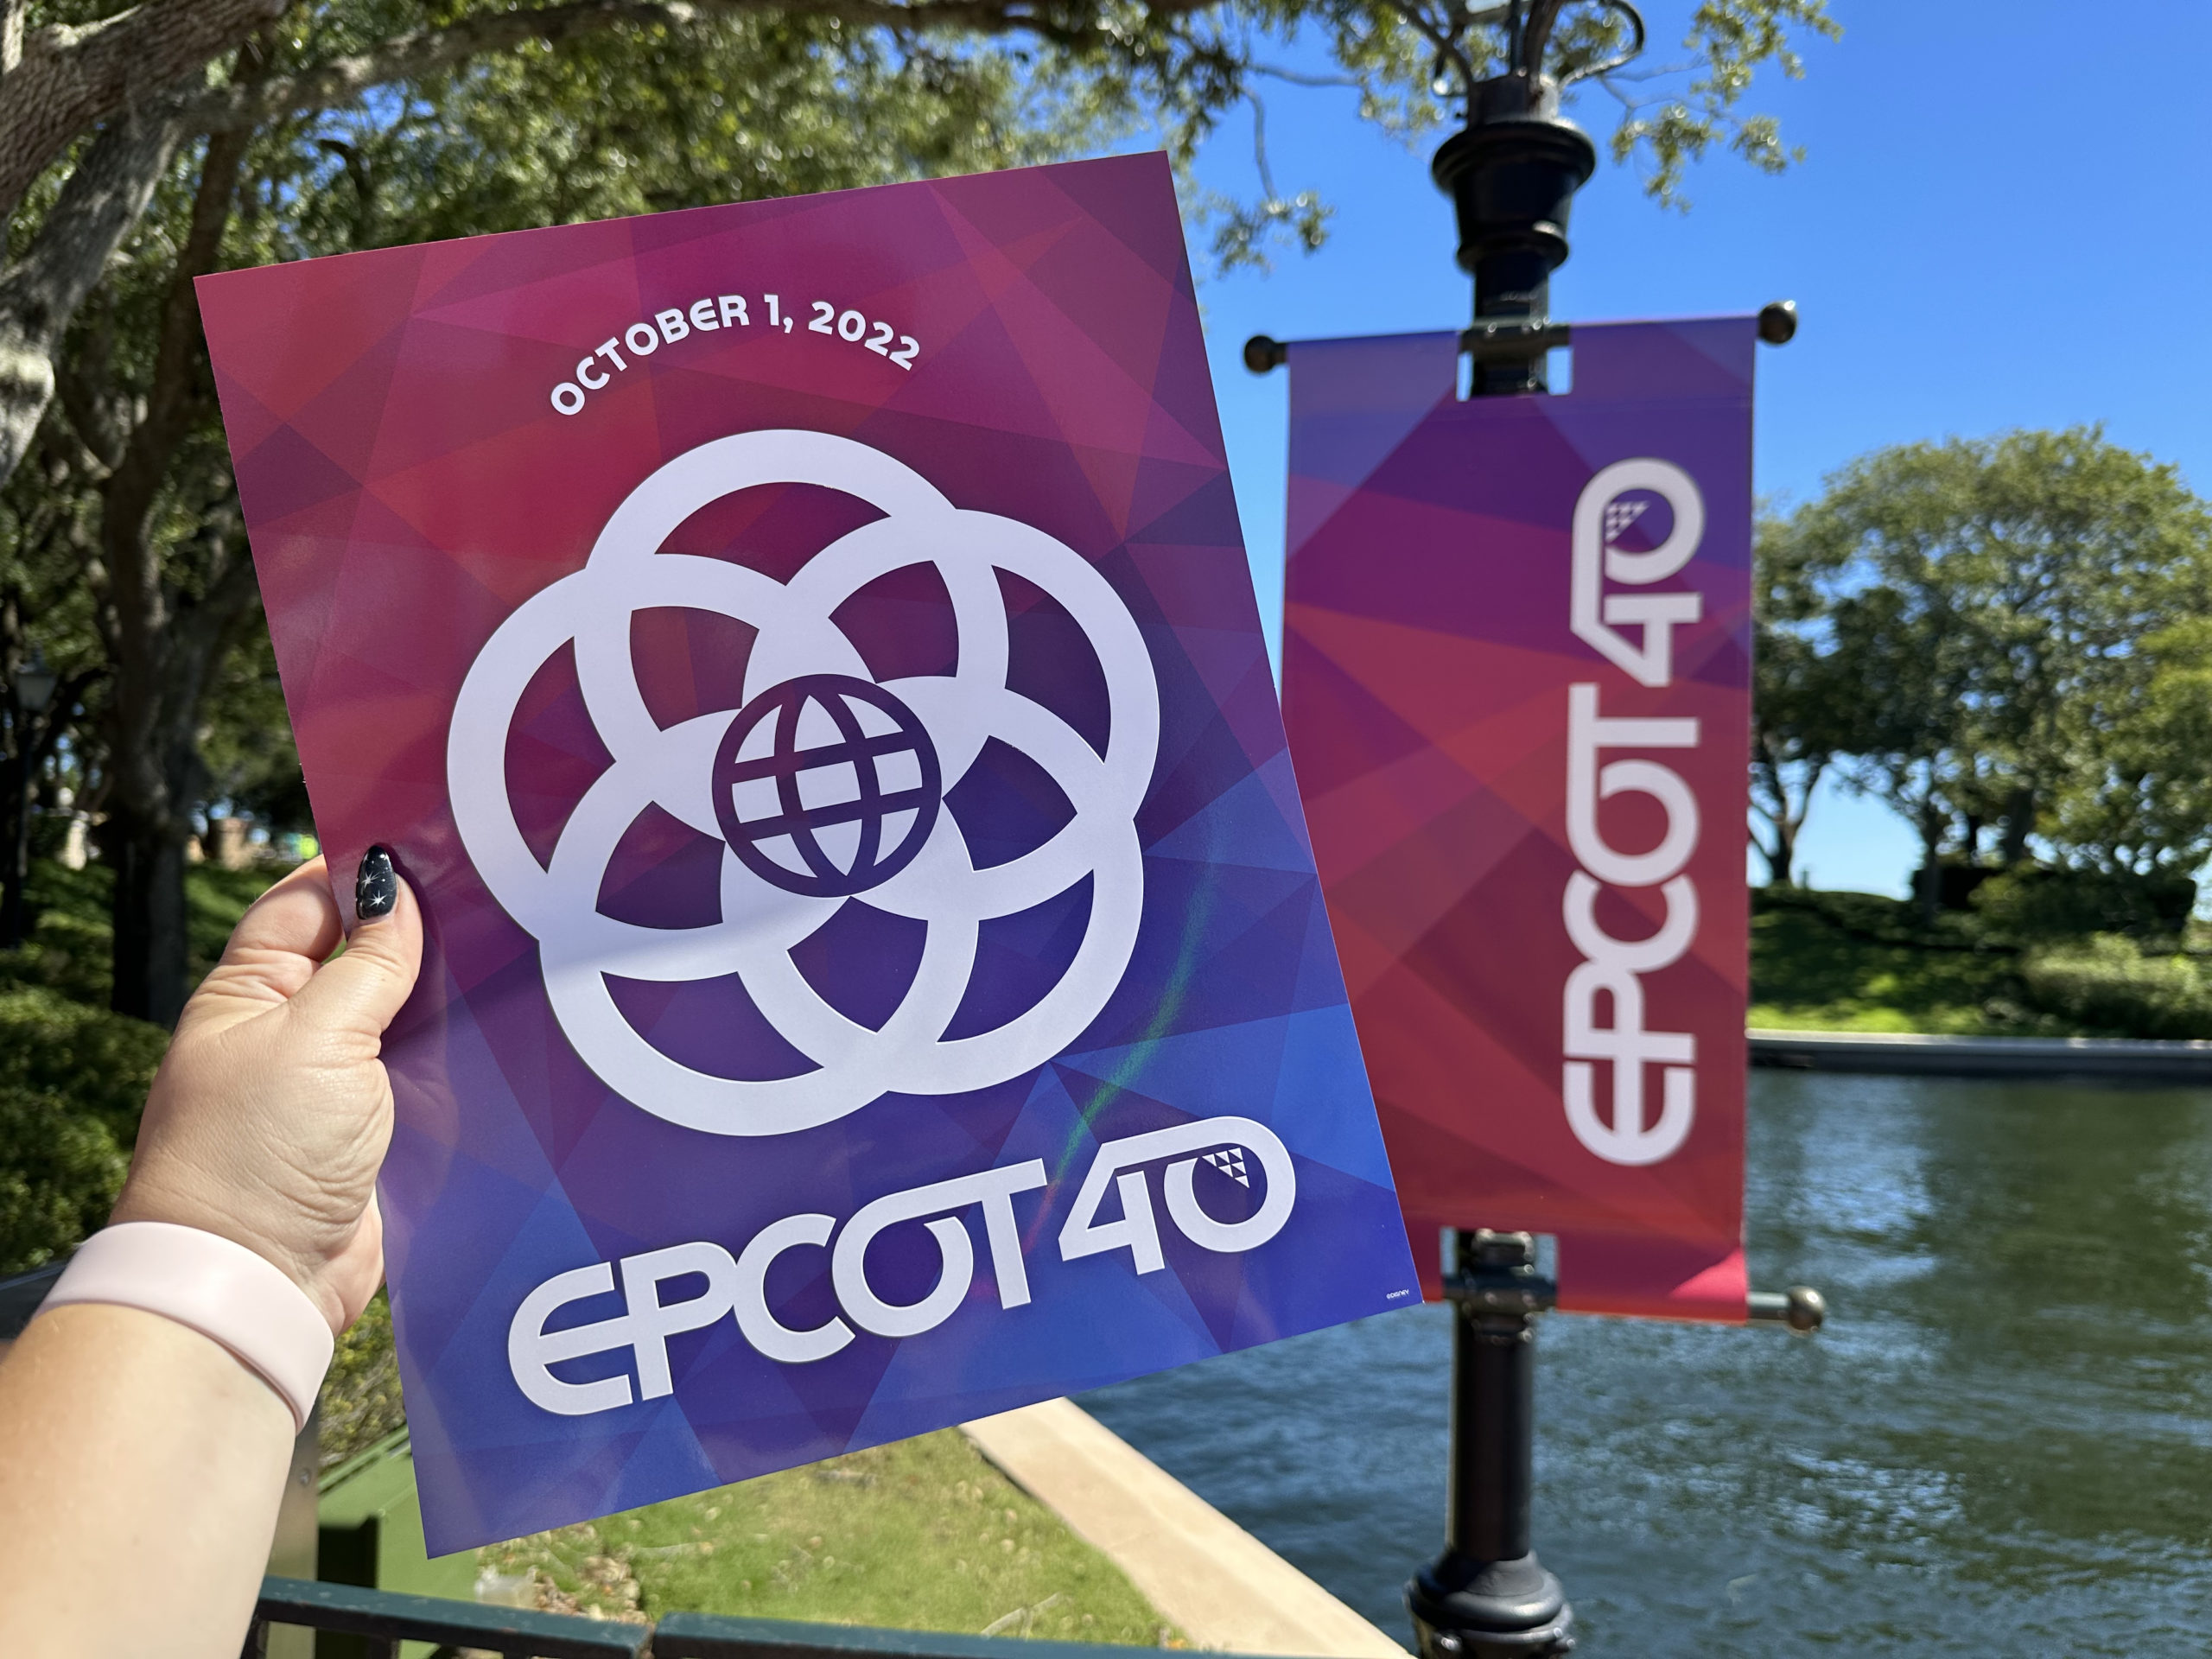 EPCOT PHOTO REPORT 1022217 scaled